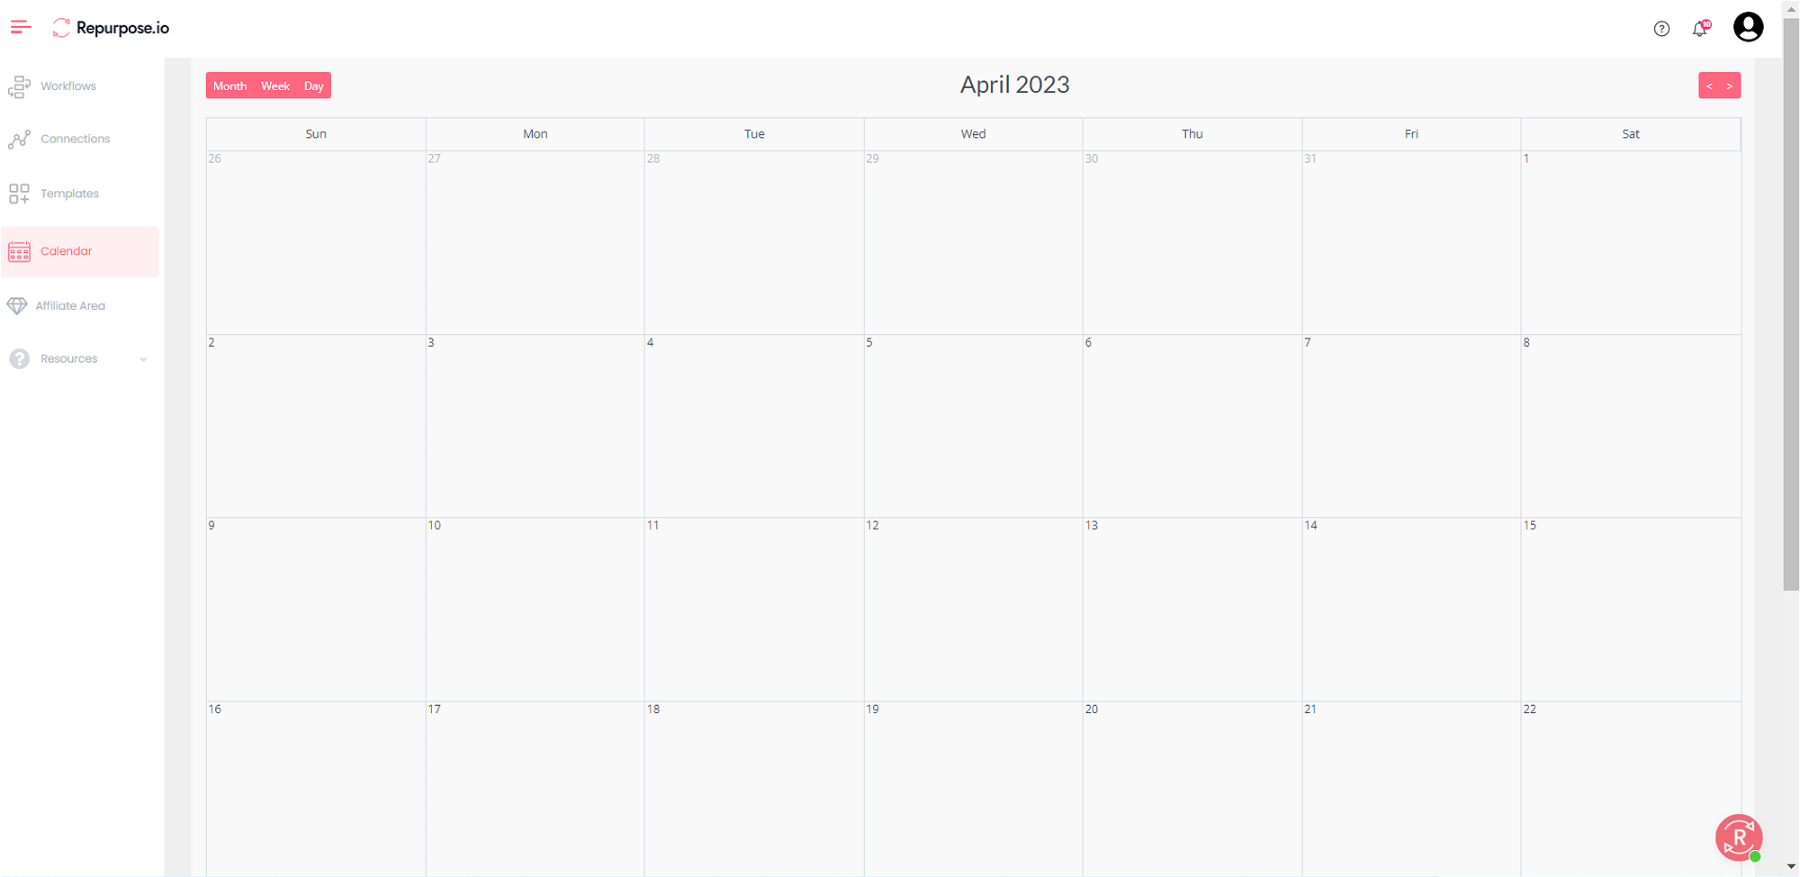 You can distribute your content in multiple channels with RePurpose’s Calendar feature.